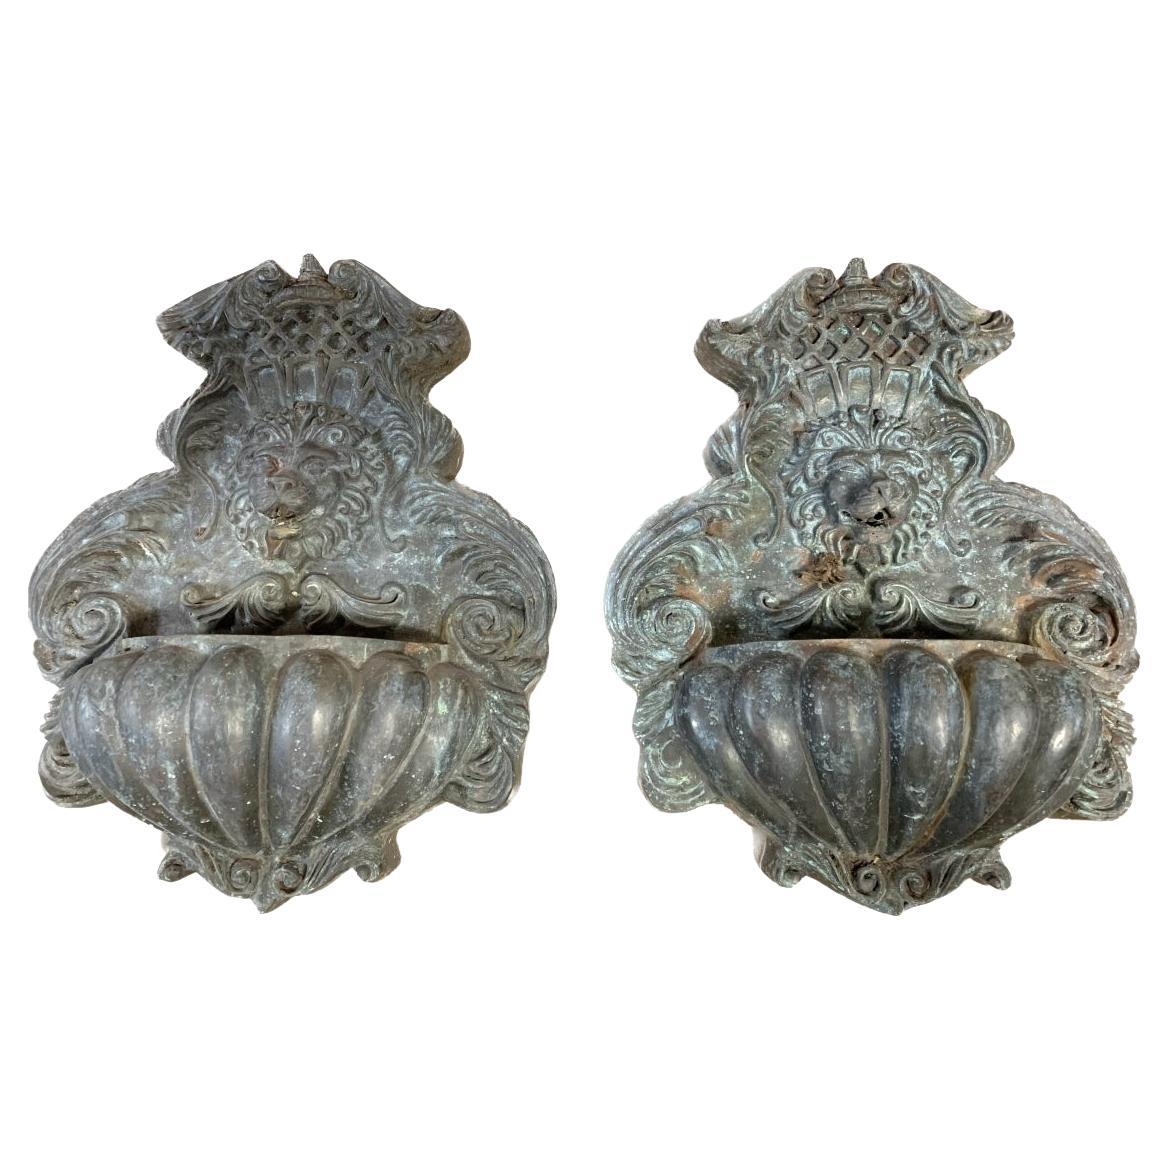 Pair Of 20th Century Bronze Lion Head Outdoor Wall Fountains With Basins For Sale